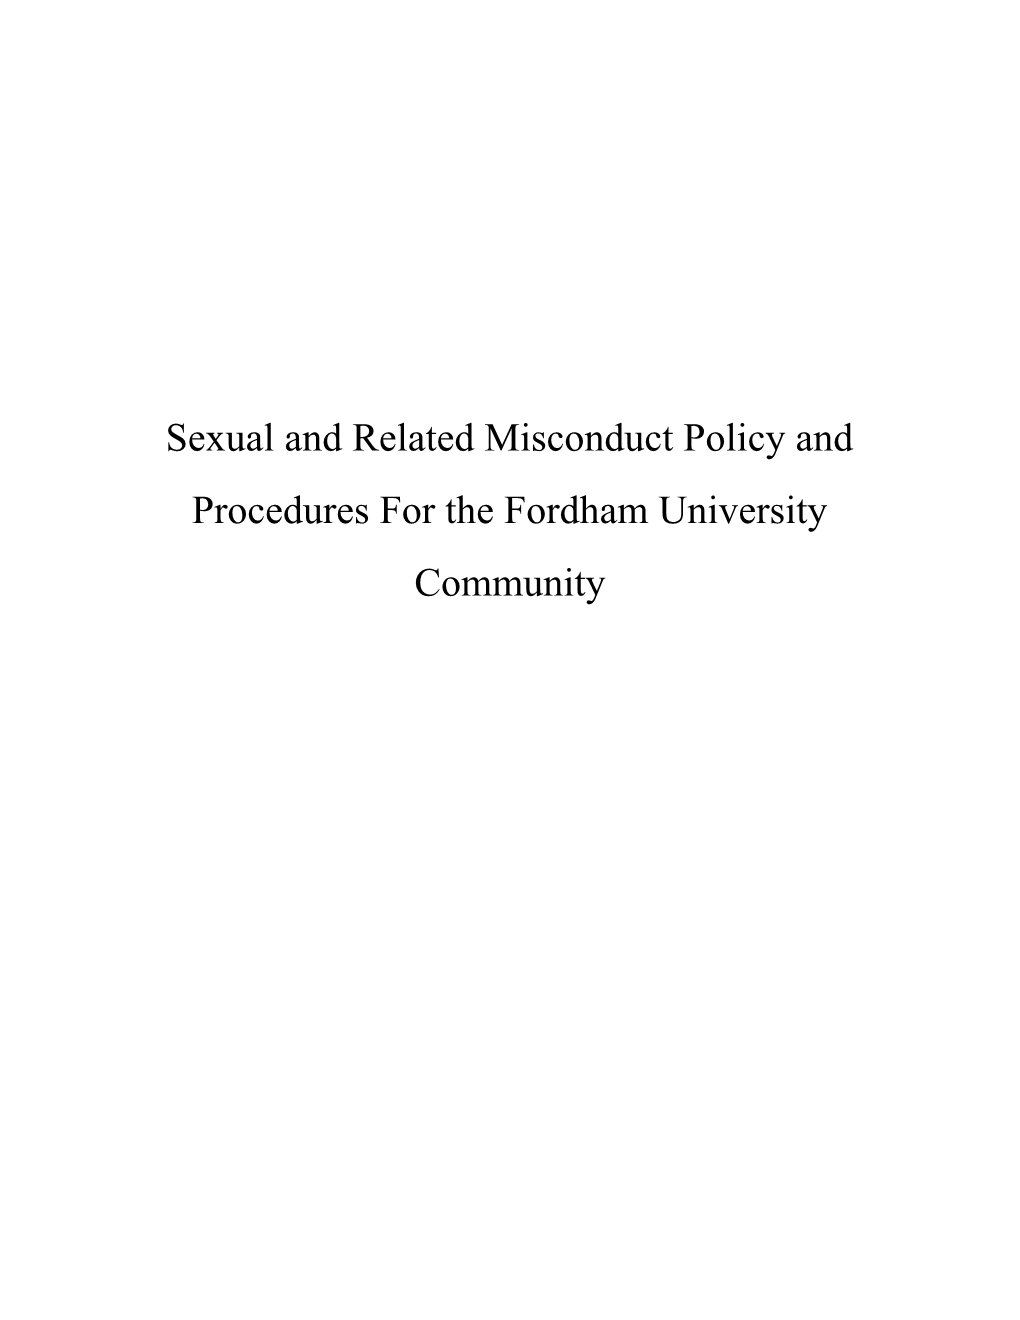 Sexual and Related Misconduct Policy and Procedures for the Fordham University Community